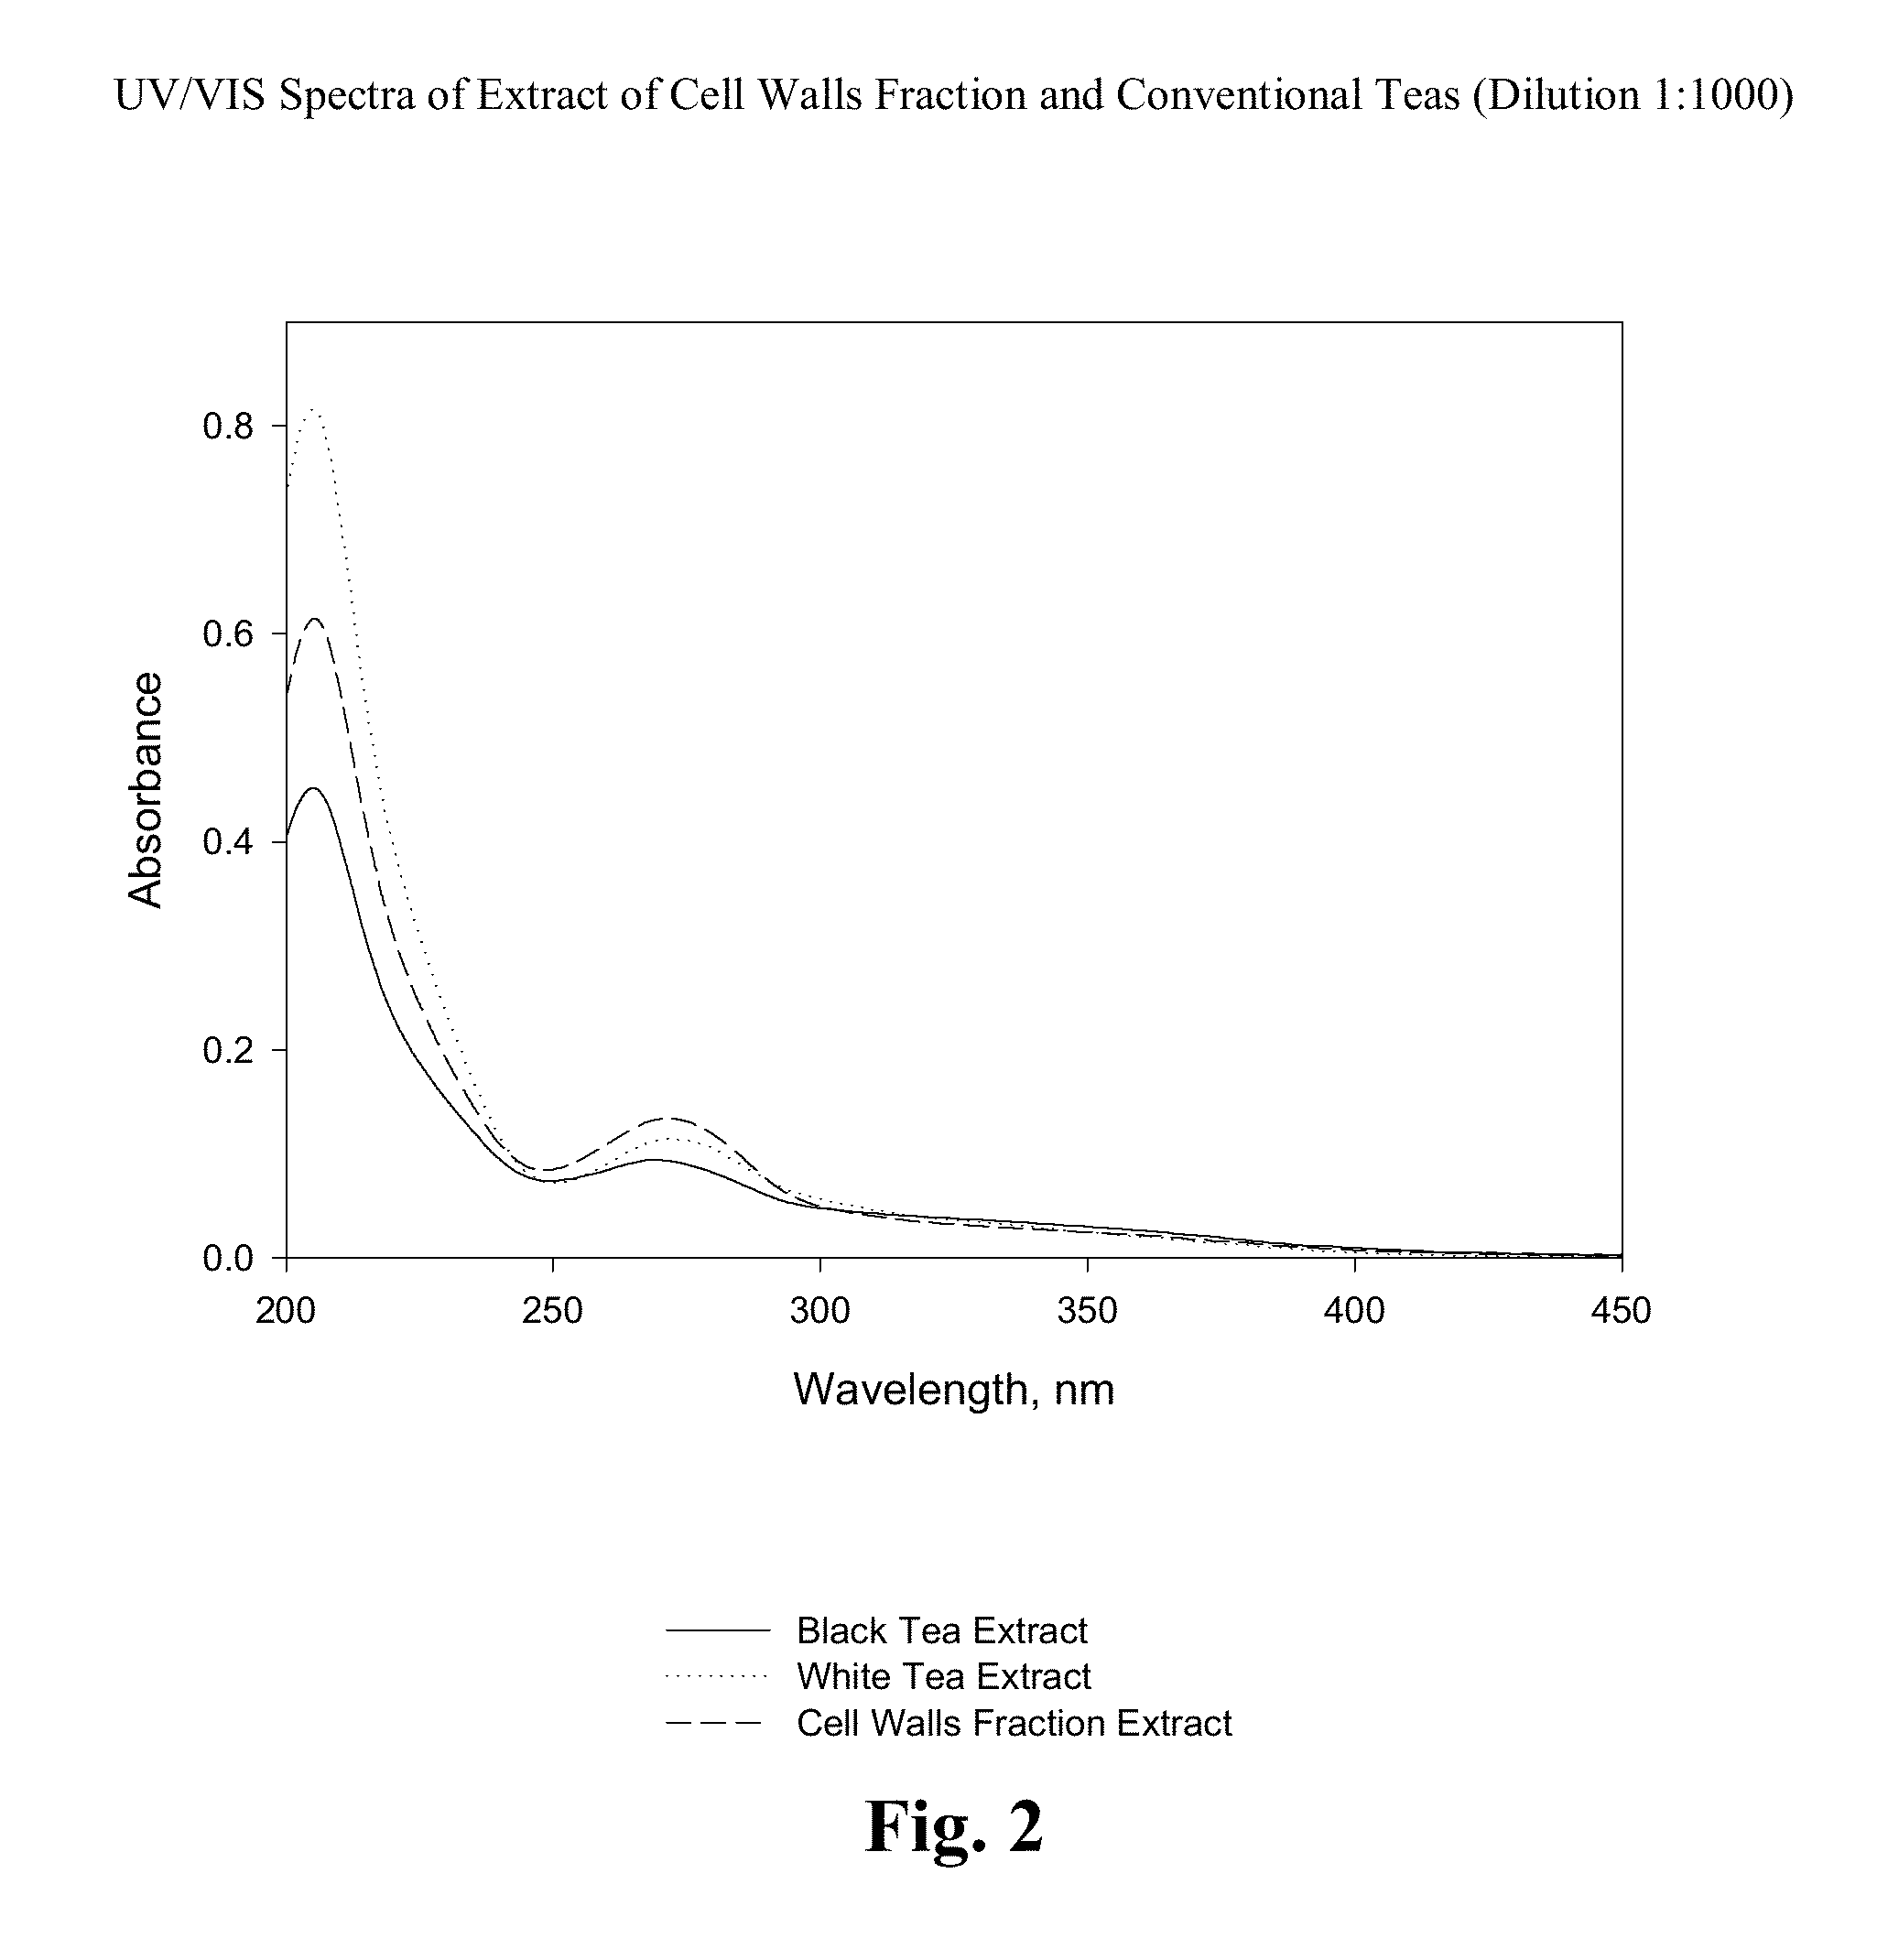 Bioactive compositions from theacea plants and use thereof in beverages, functional foods, nutriceuticals, supplements and the like